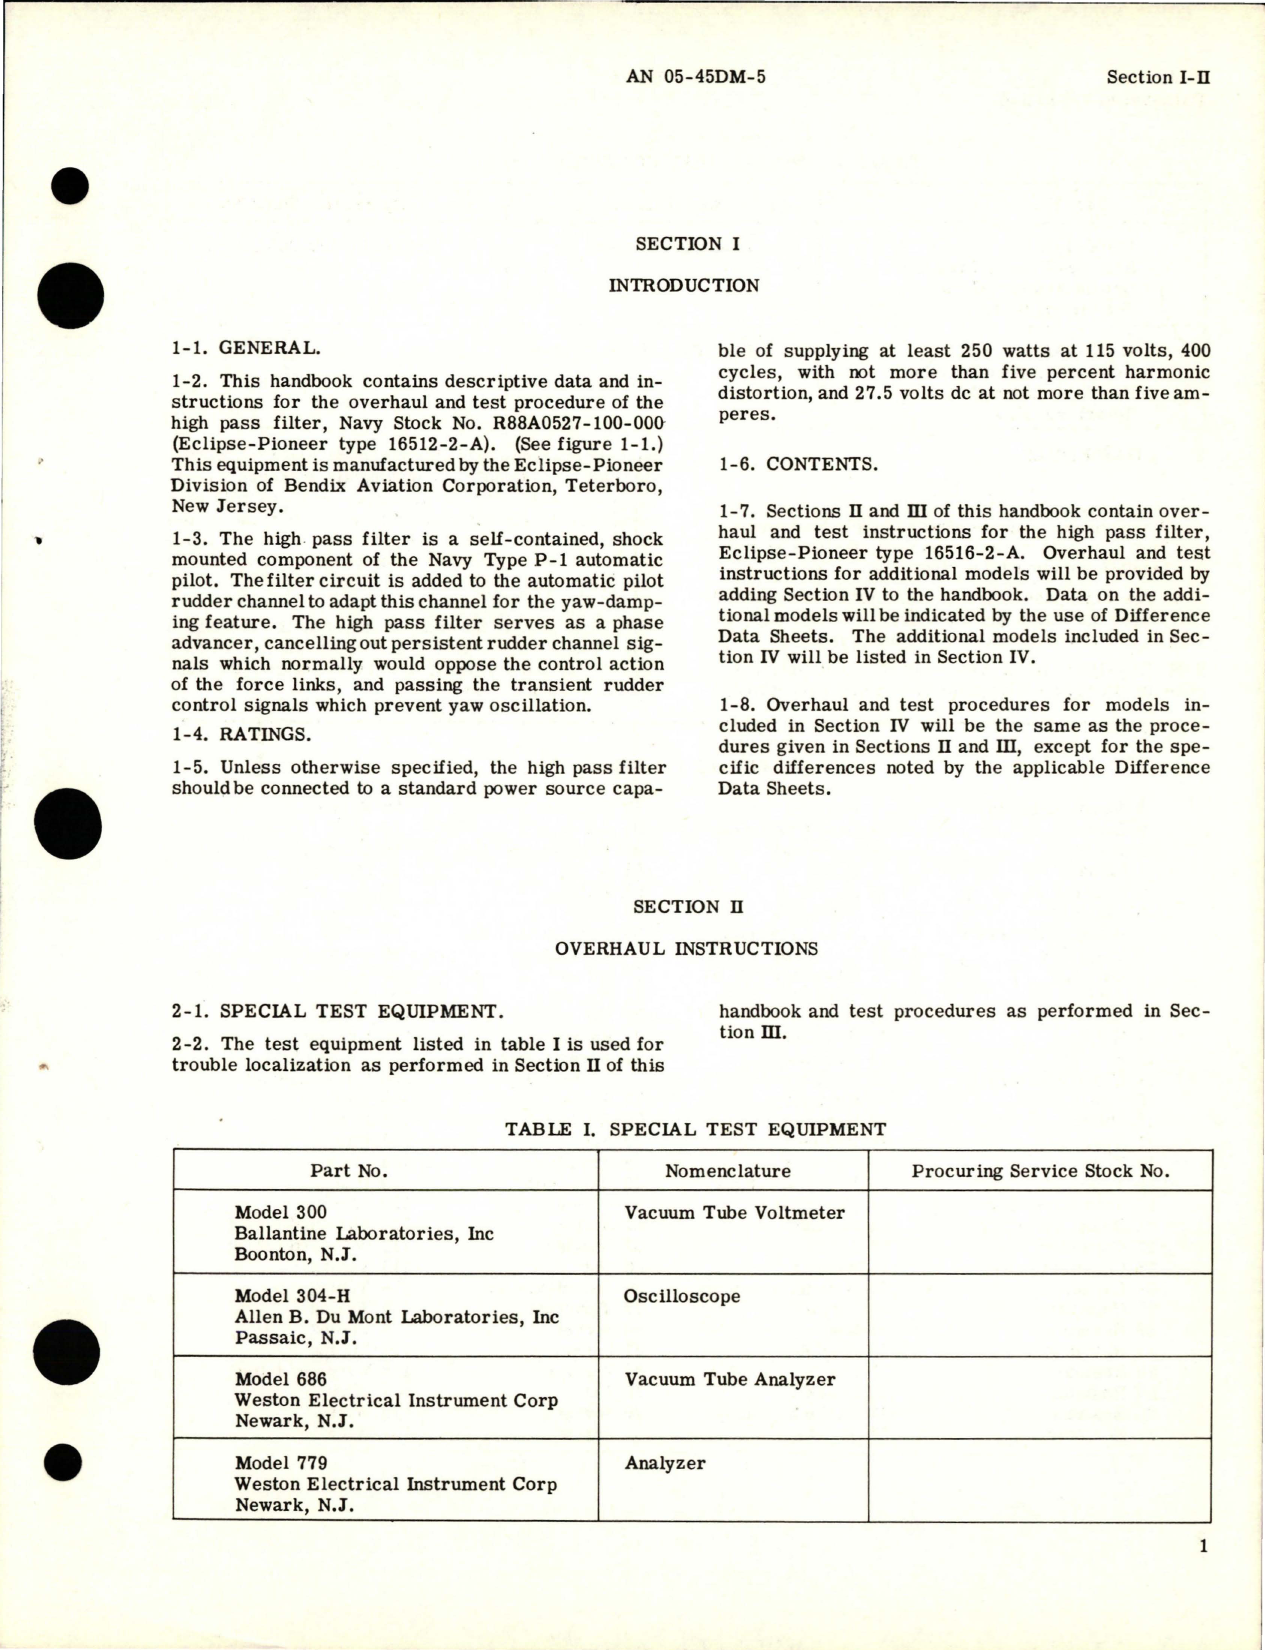 Sample page 5 from AirCorps Library document: Overhaul Instructions for High Pass Filter - Part 16516-2-A